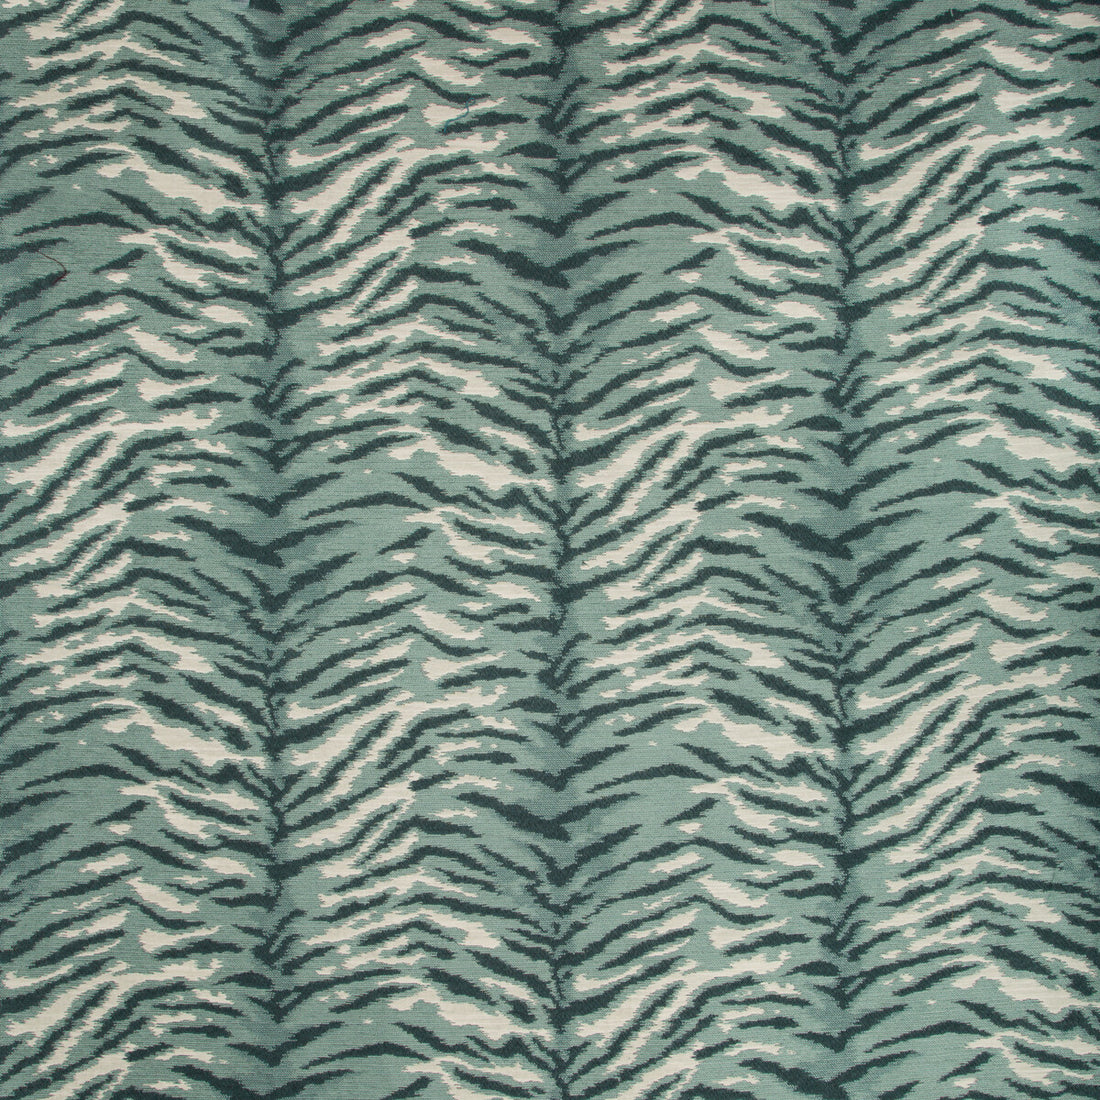 Kravet Design fabric in 34997-515 color - pattern 34997.515.0 - by Kravet Design in the Performance Crypton Home collection